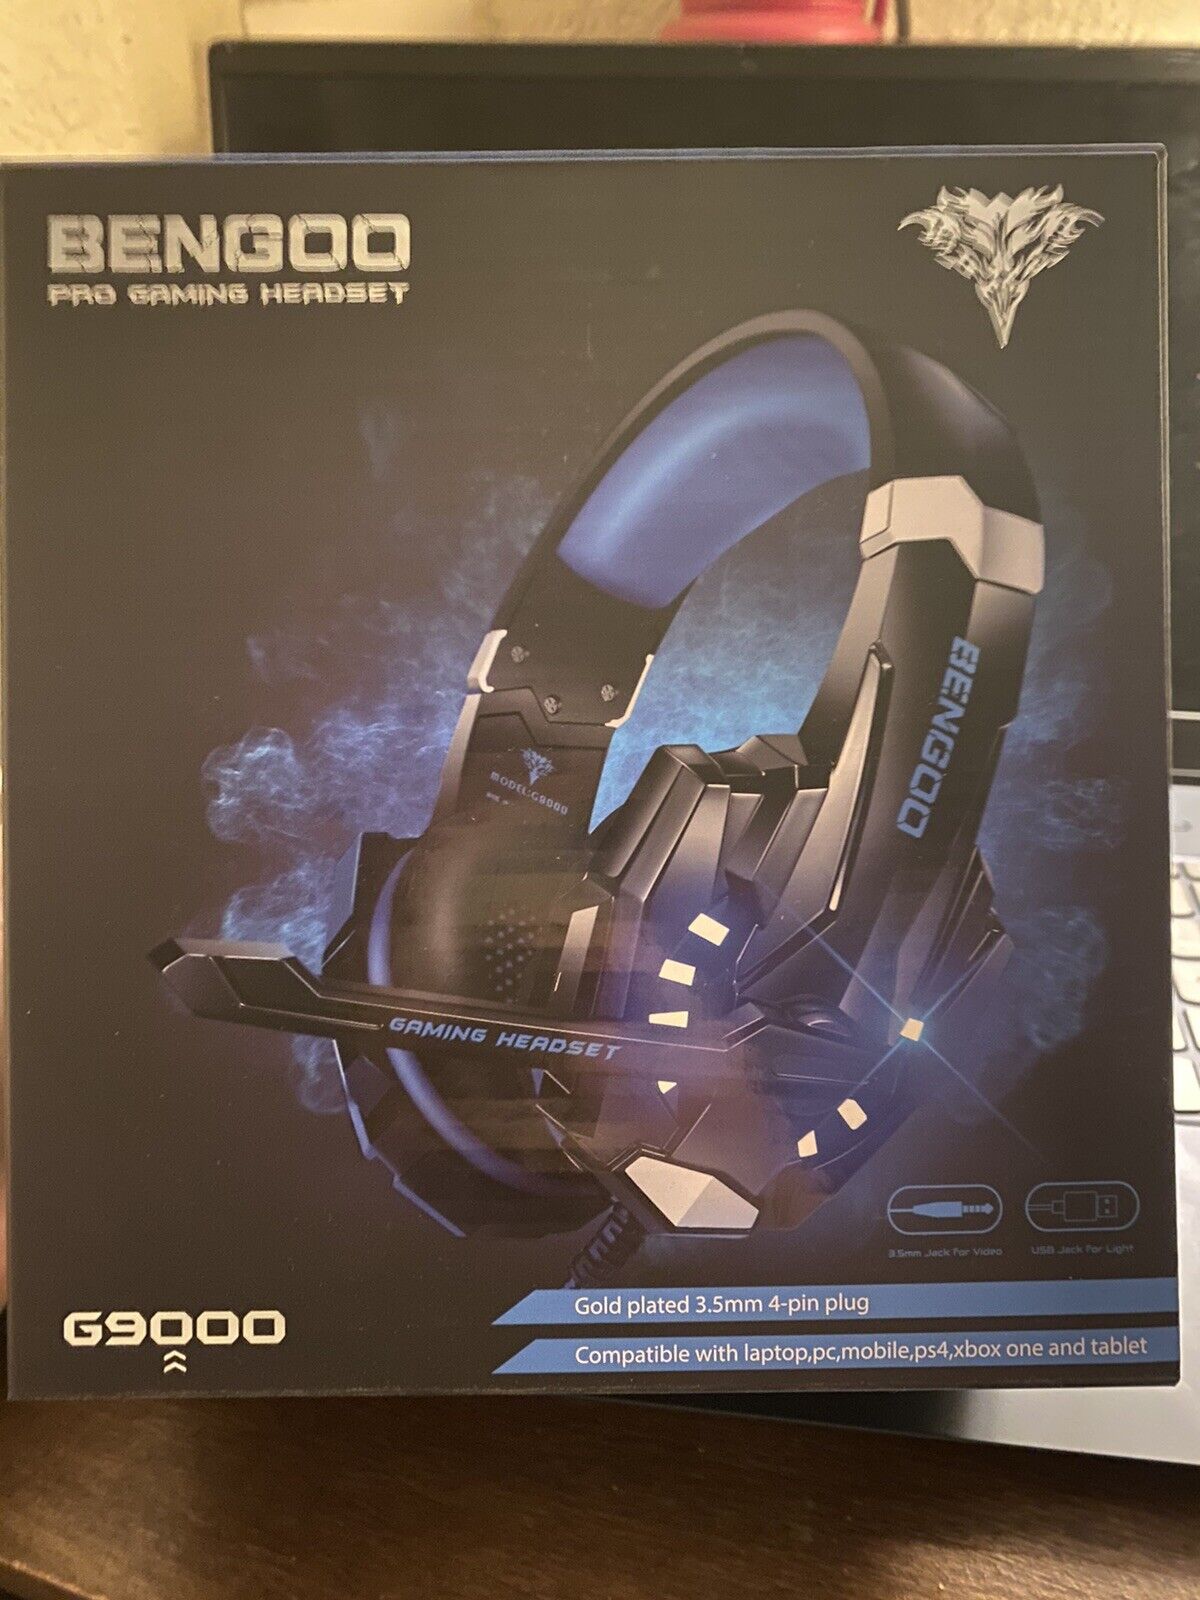 Bengoo G9000 Stereo Gaming Headset for Ps4 PC Xbox One (PRICE DROP)